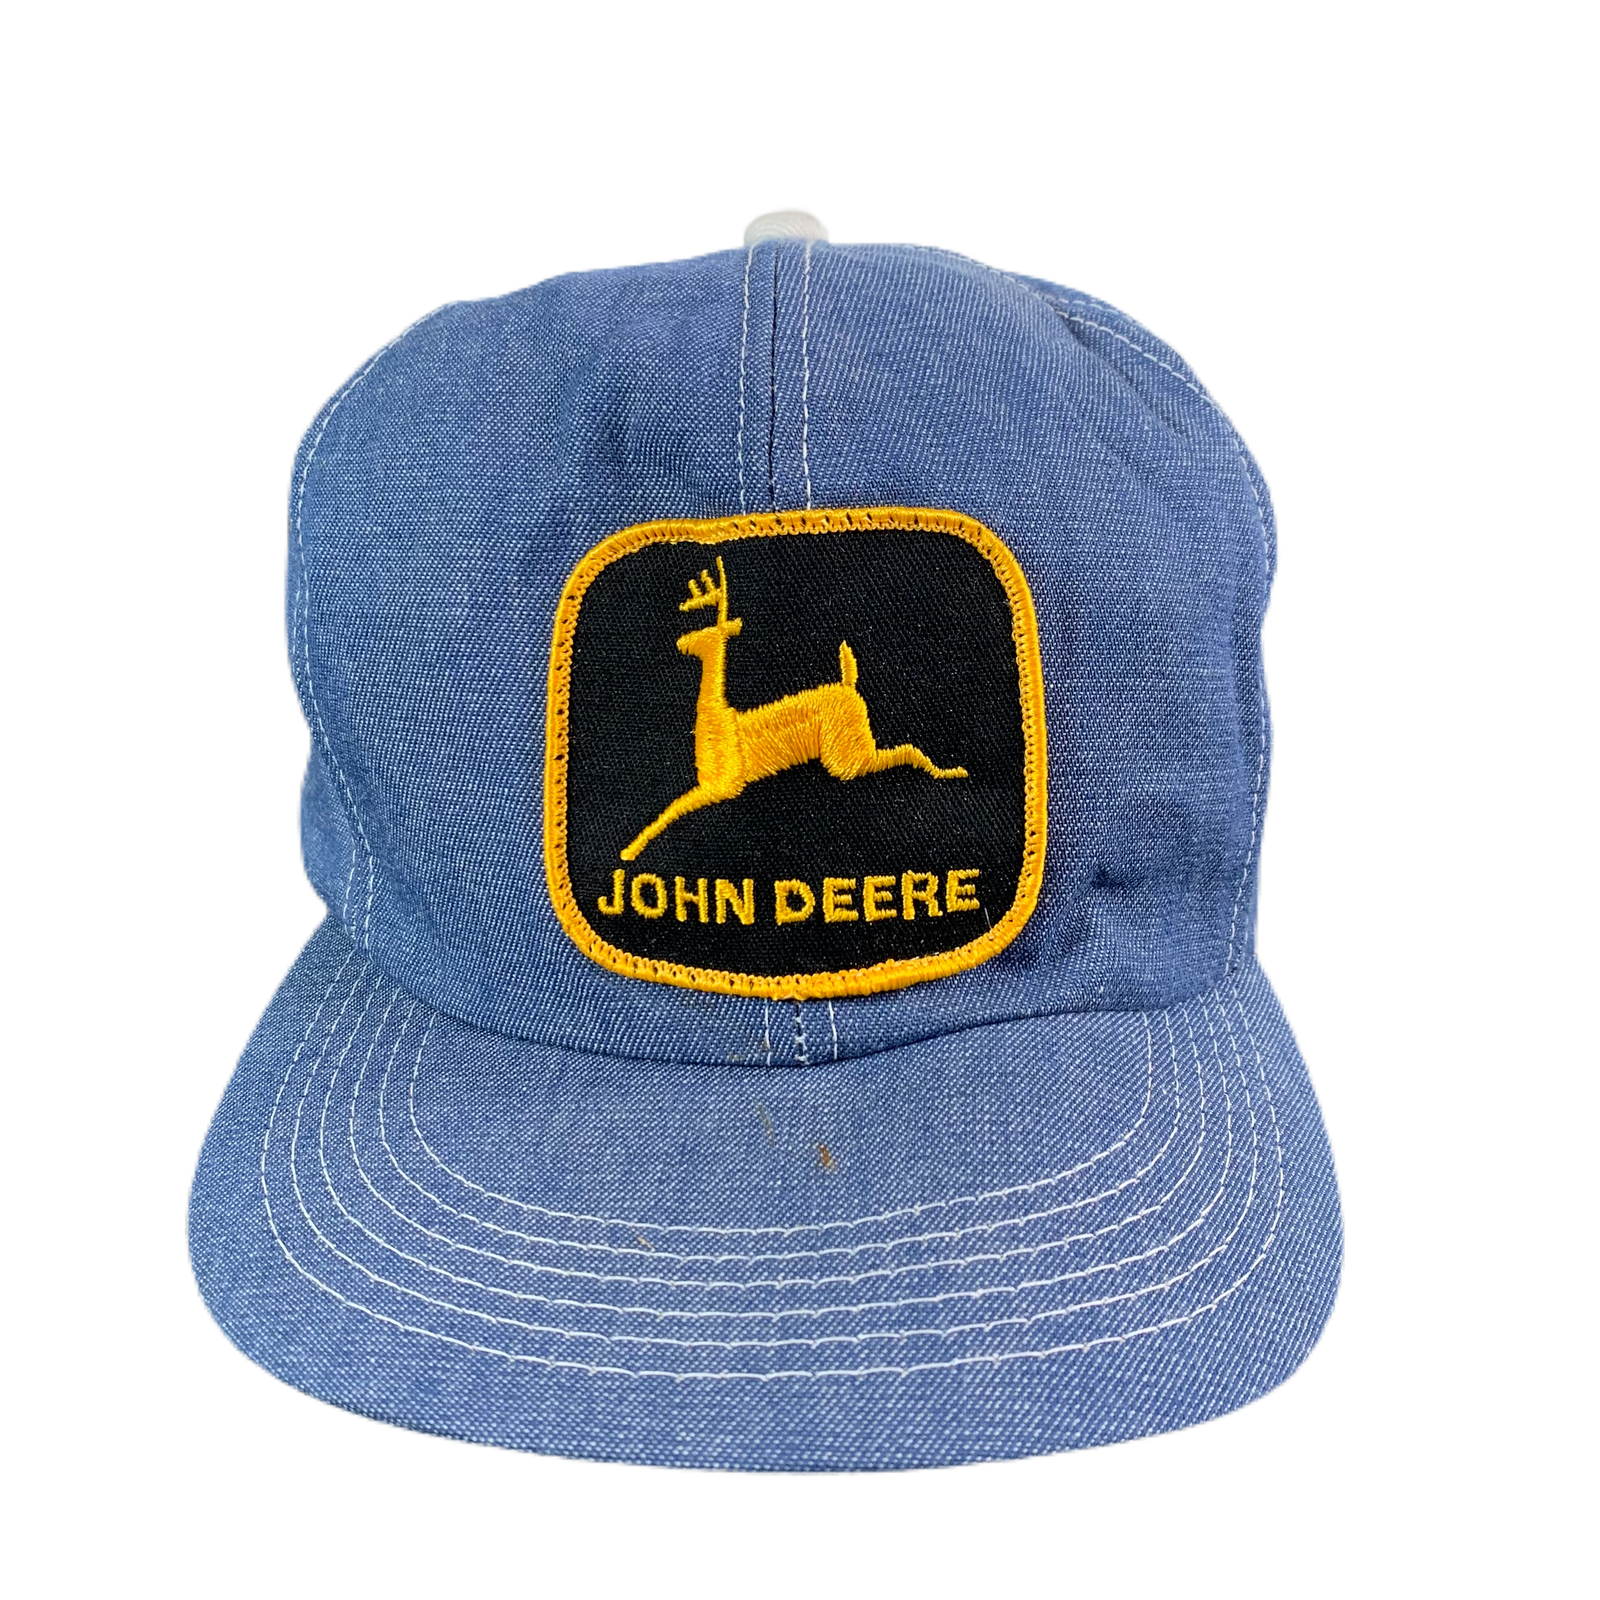 John Deere Navy and Silver Cap with Vintage Logo - VC Traders